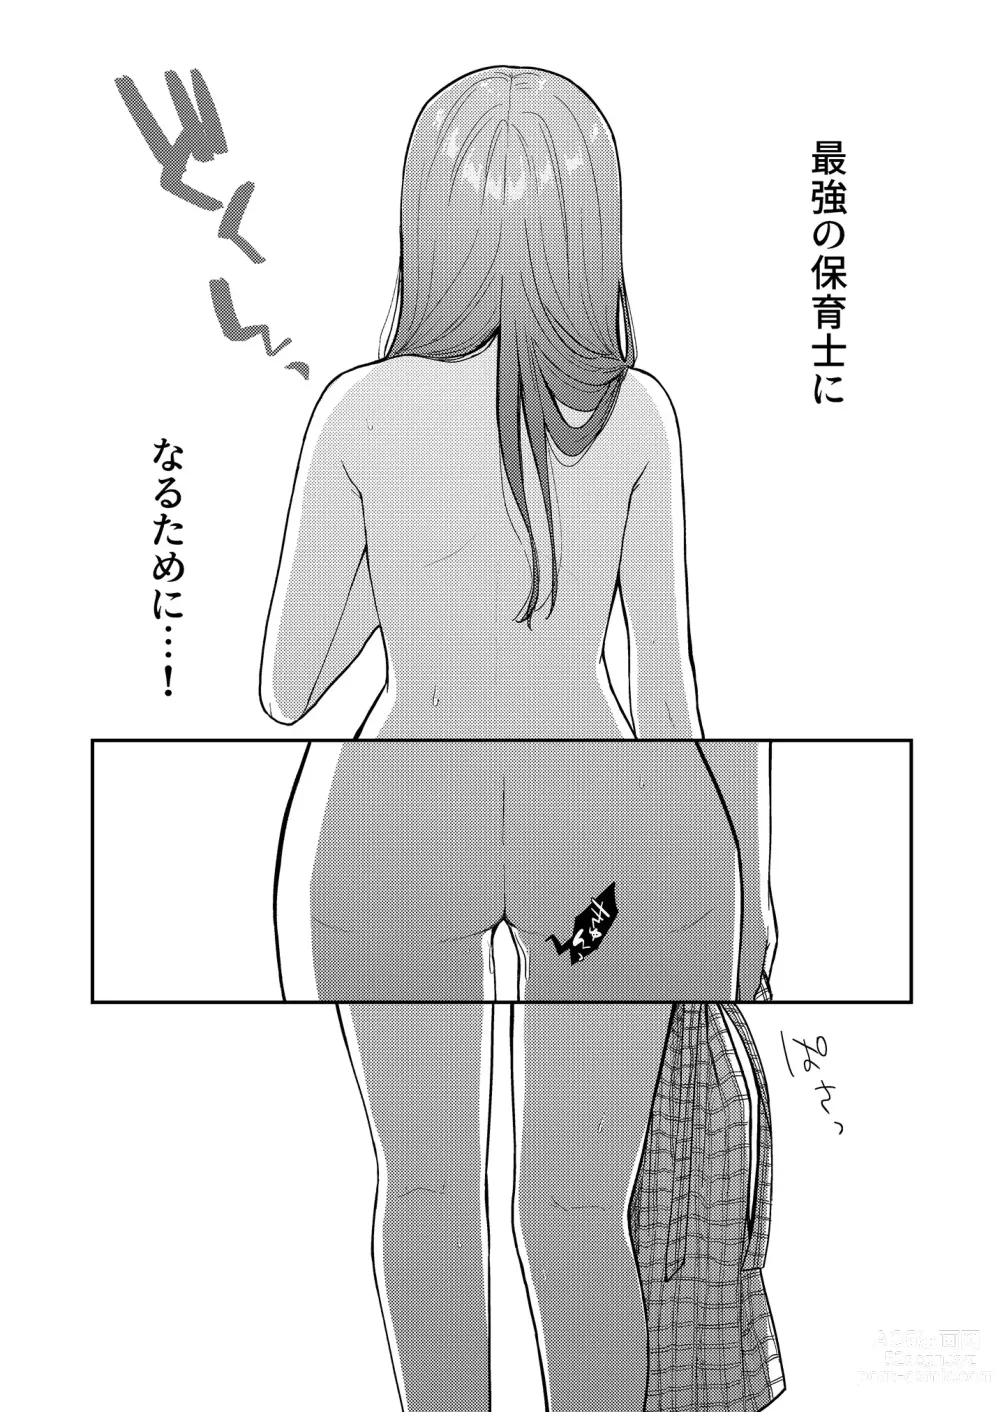 Page 11 of doujinshi Ageha tente to issho